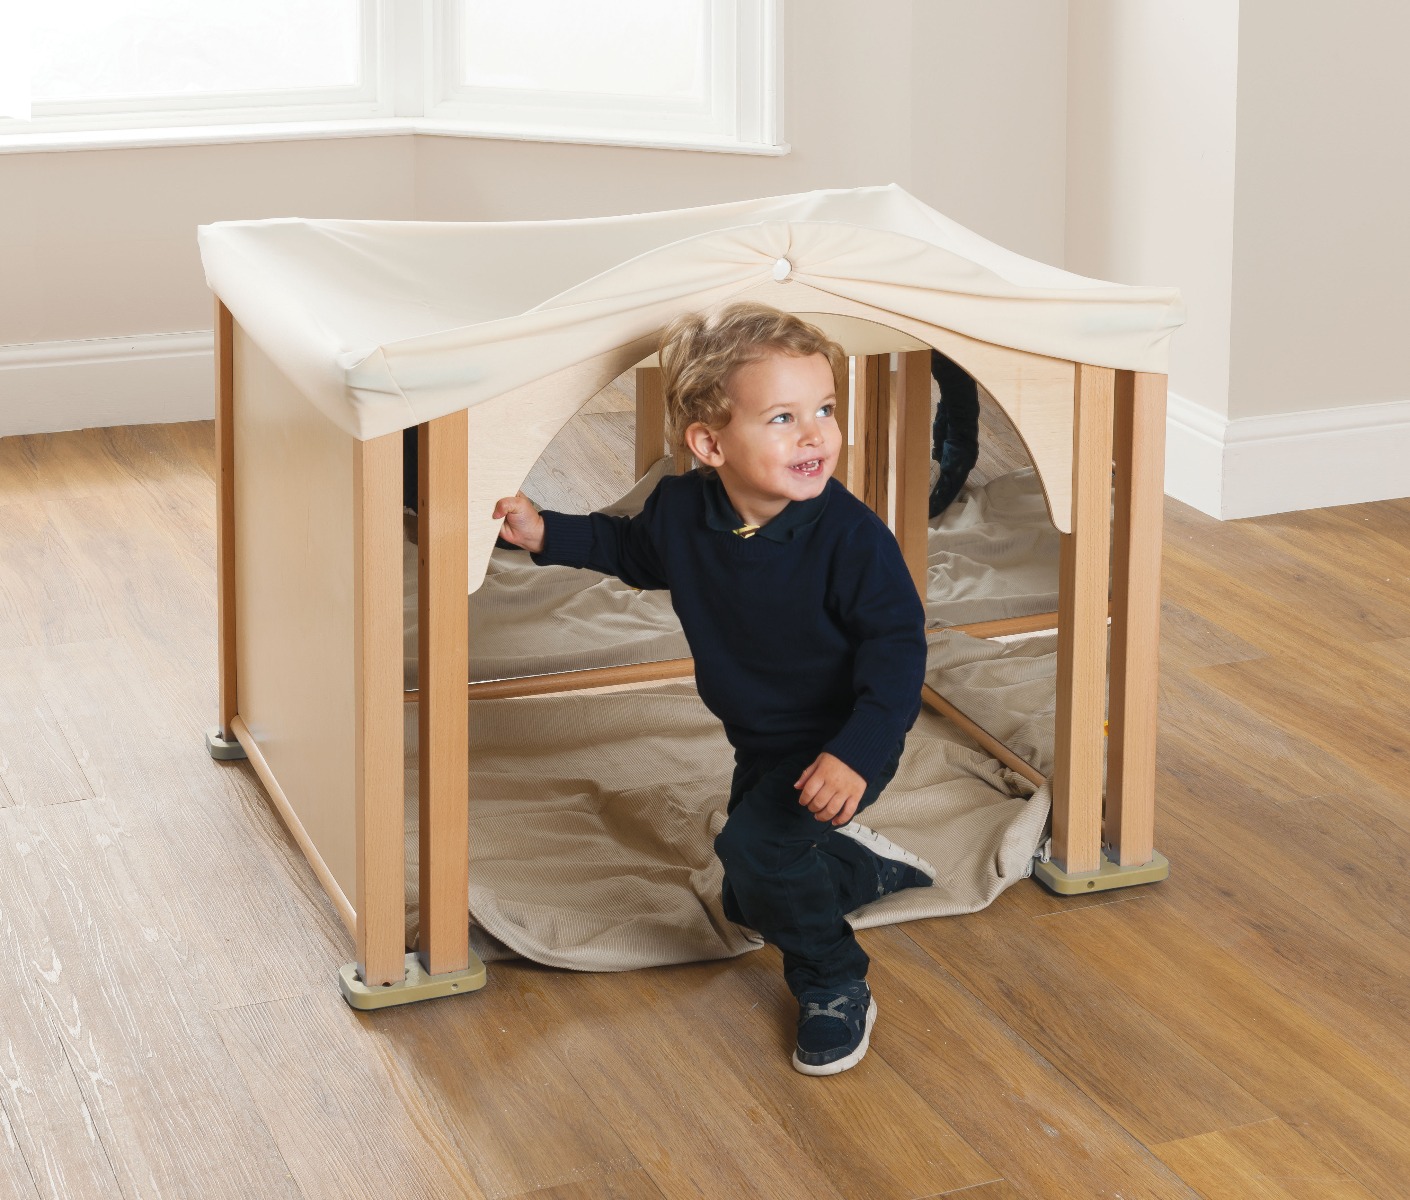 Millhouse PlayScapes Toddler Cosy Mirror Den Set 